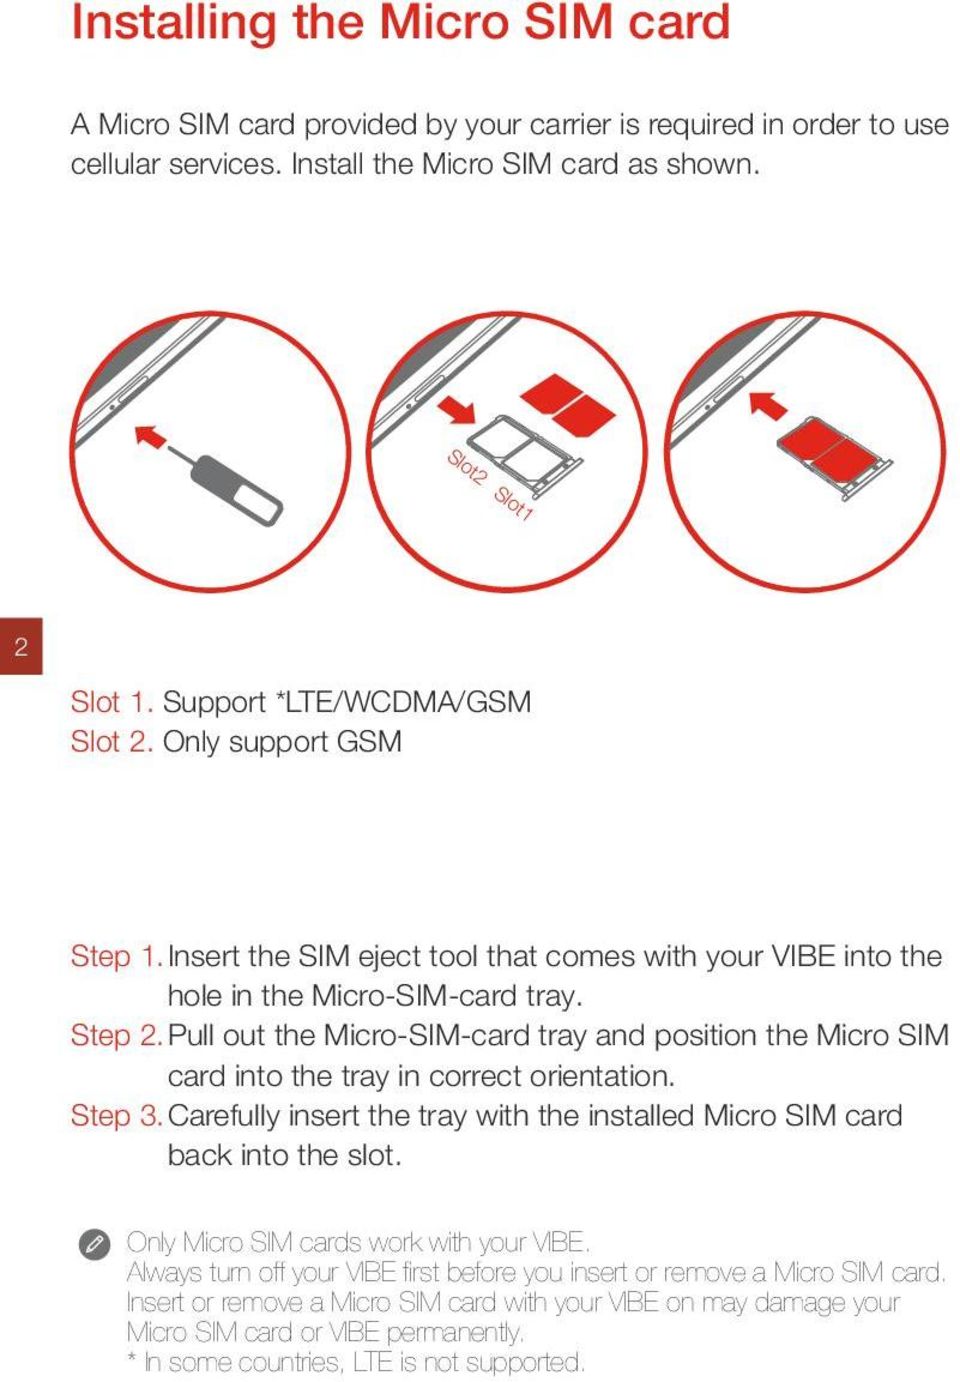 Pull out the Micro-SIM-card tray and position the Micro SIM card into the tray in correct orientation. Step 3. Carefully insert the tray with the installed Micro SIM card back into the slot.